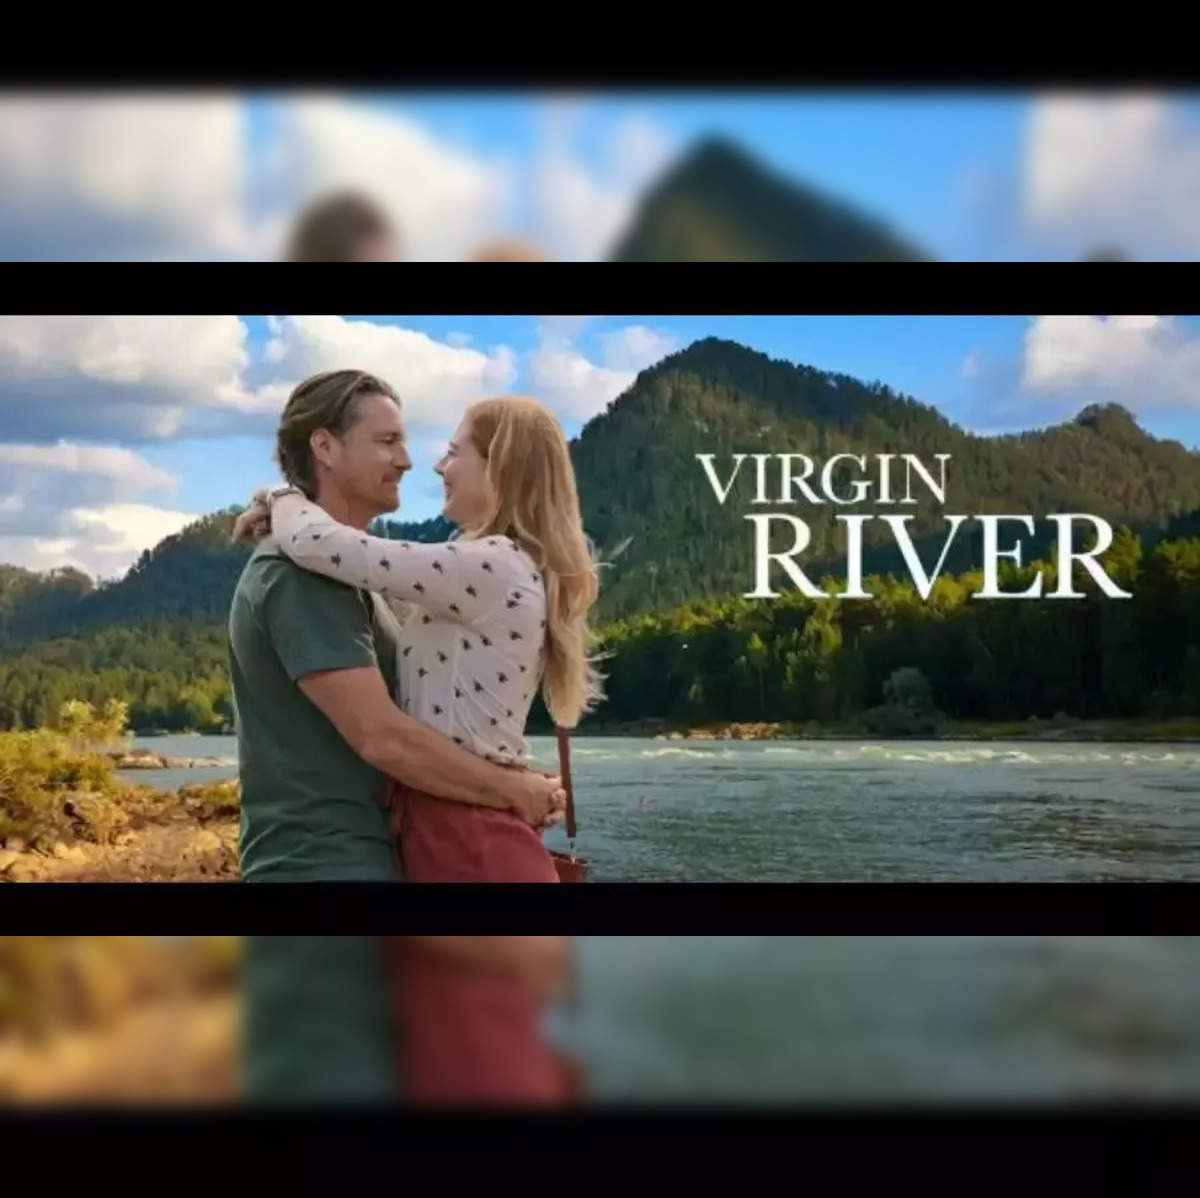 Virgin River Season 5 Release Schedule: 'Virgin River' season 5 on: See  release schedule on Netflix and all you need to know - The Economic Times